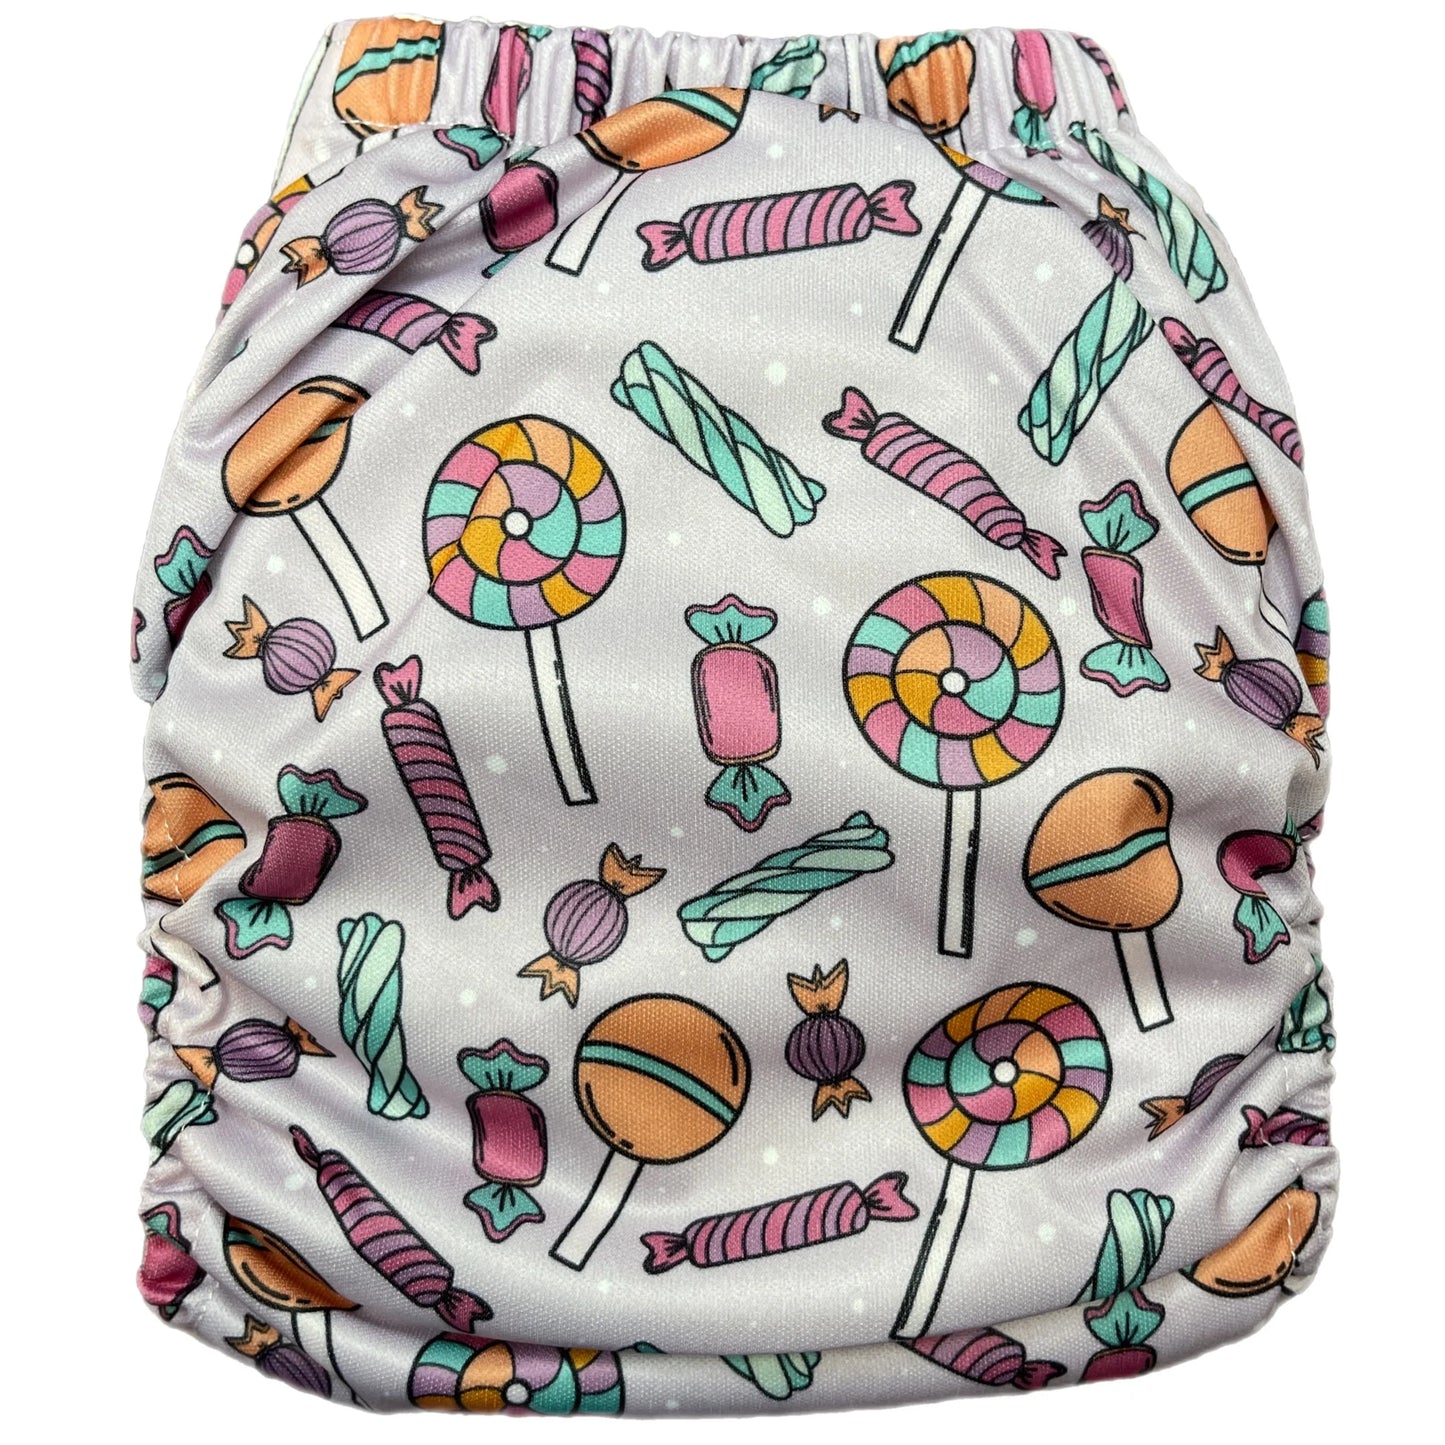 One Size Pocket Diapers